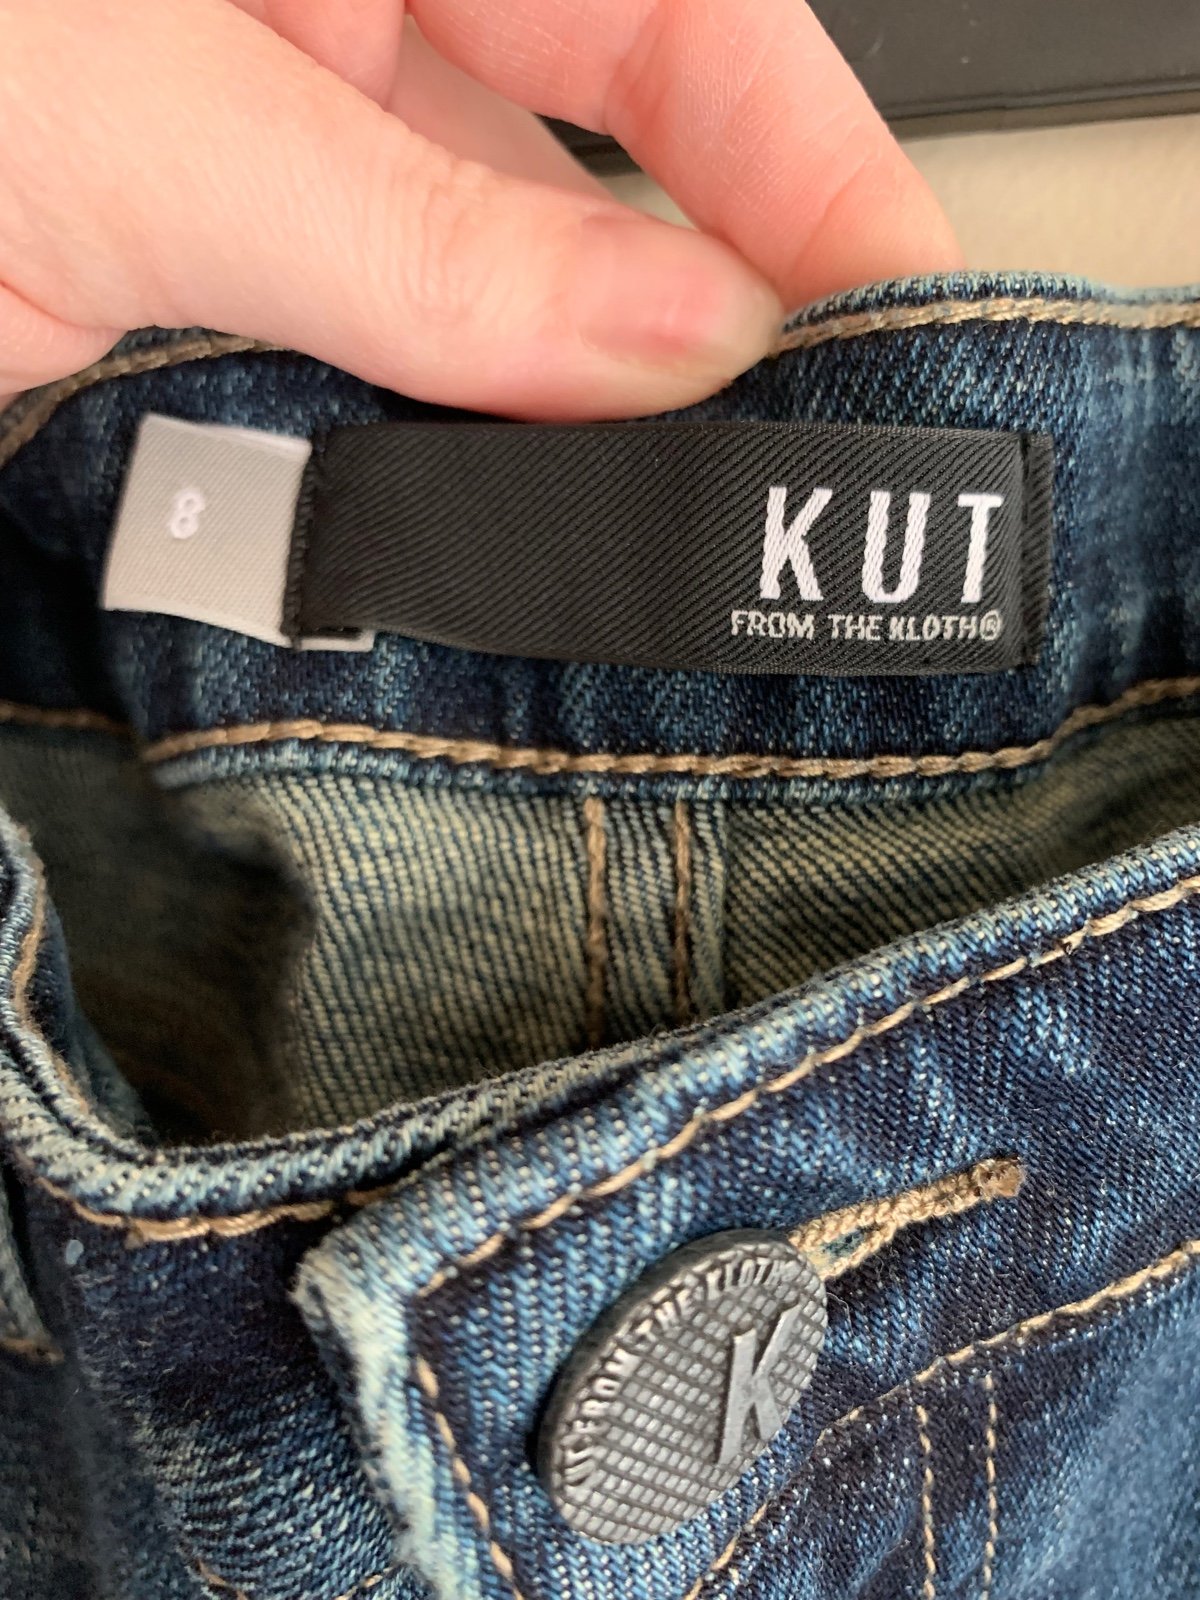 the Lowest price Kut from the kloth jeans size 8 je5hPd5vF Novel 